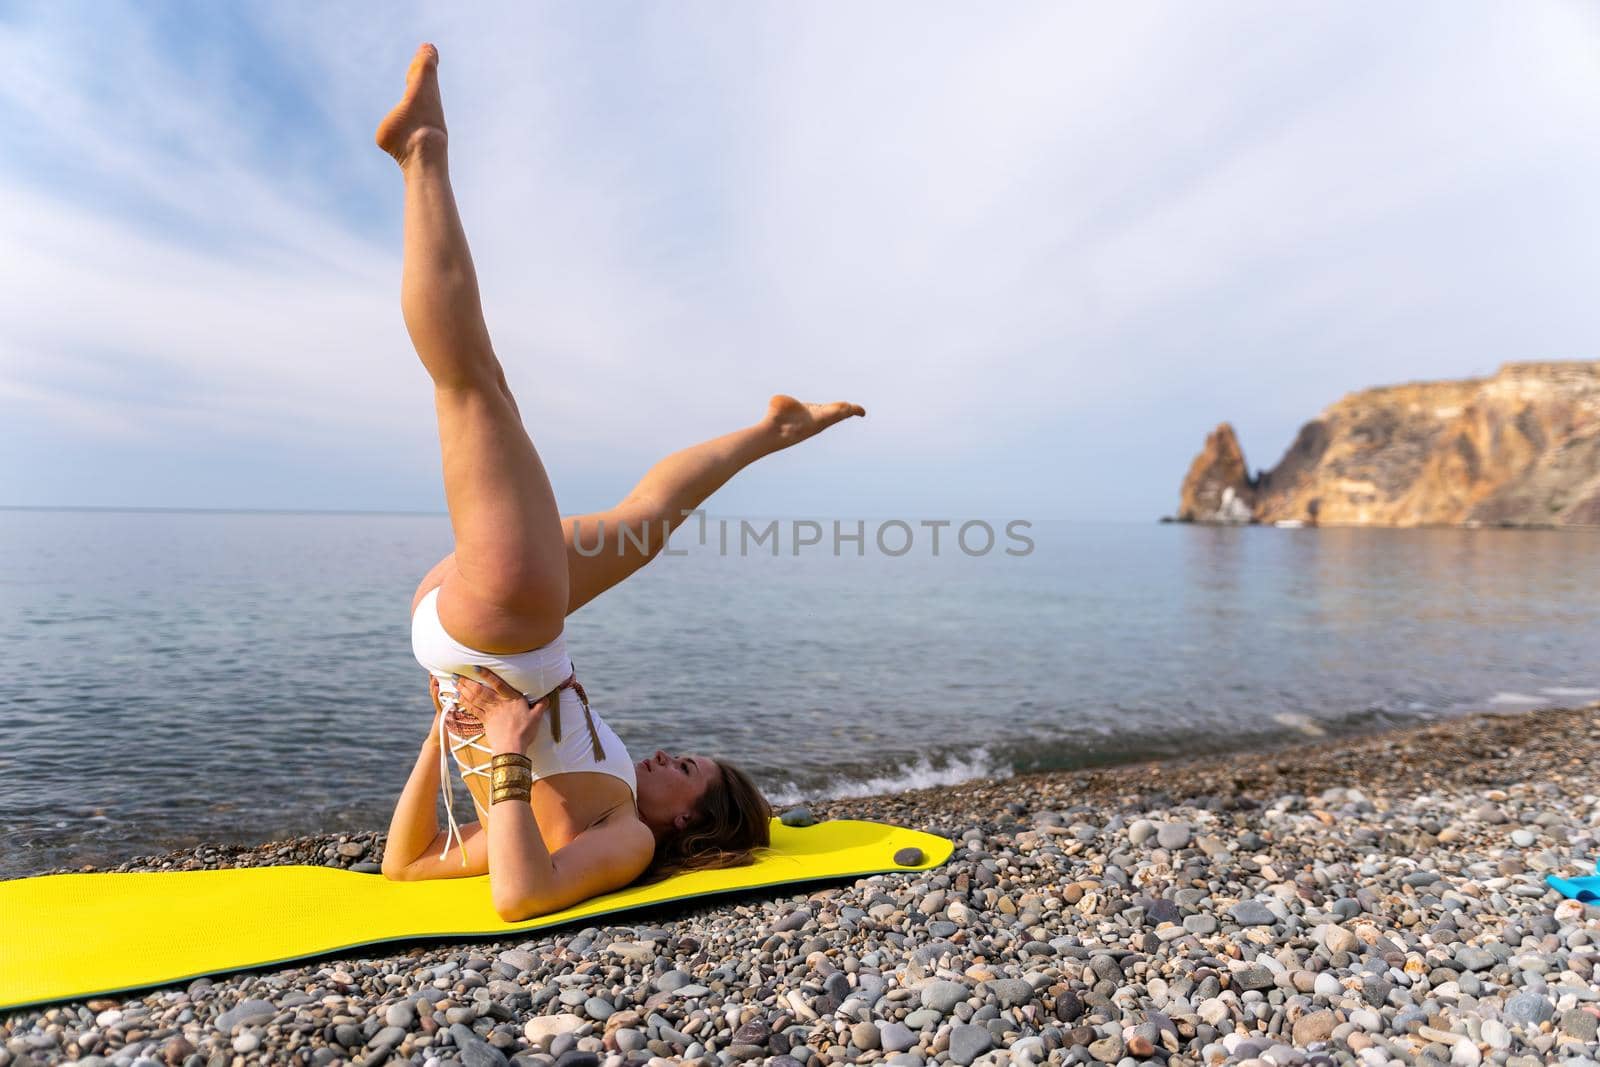 Young woman in white swimsuit with long hair practicing stretching outdoors on yoga mat by the sea on a sunny day. Women's yoga fitness pilates routine. Healthy lifestyle and meditation concept by panophotograph